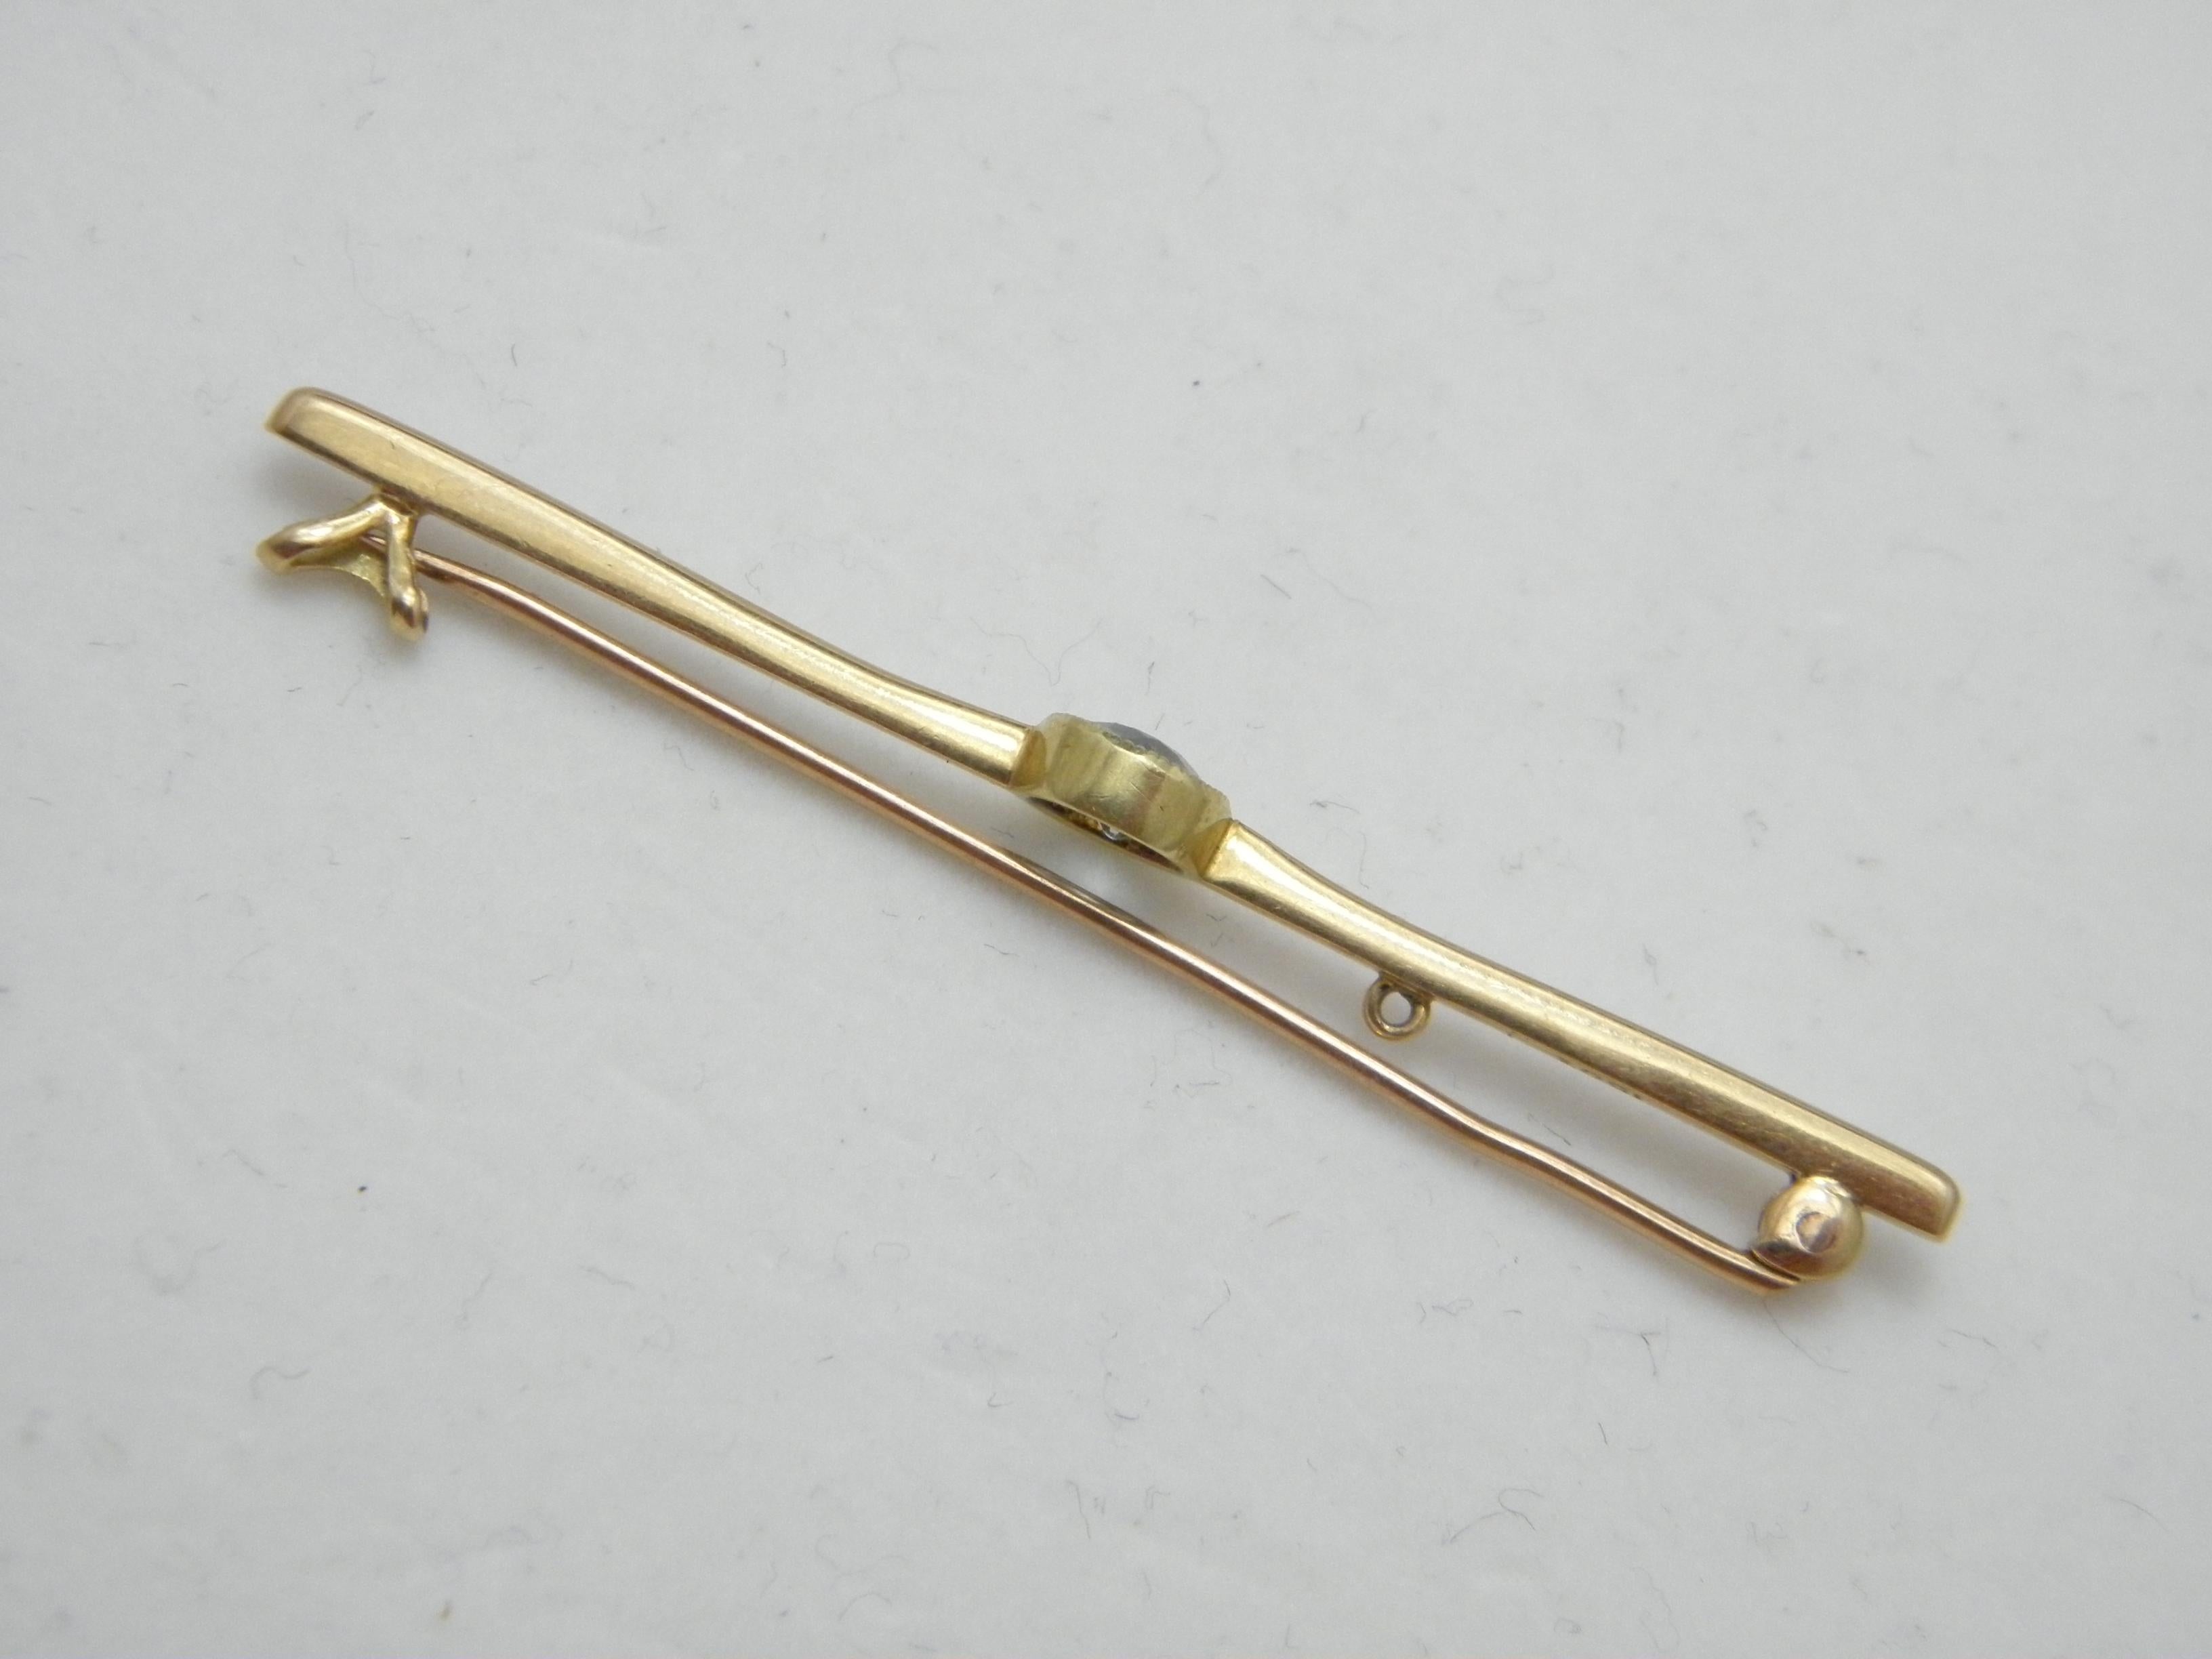 Antique 15ct Gold Aquamarine Solitaire Bar Brooch Pin c1890 625 Purity Heavy In Good Condition For Sale In Camelford, GB